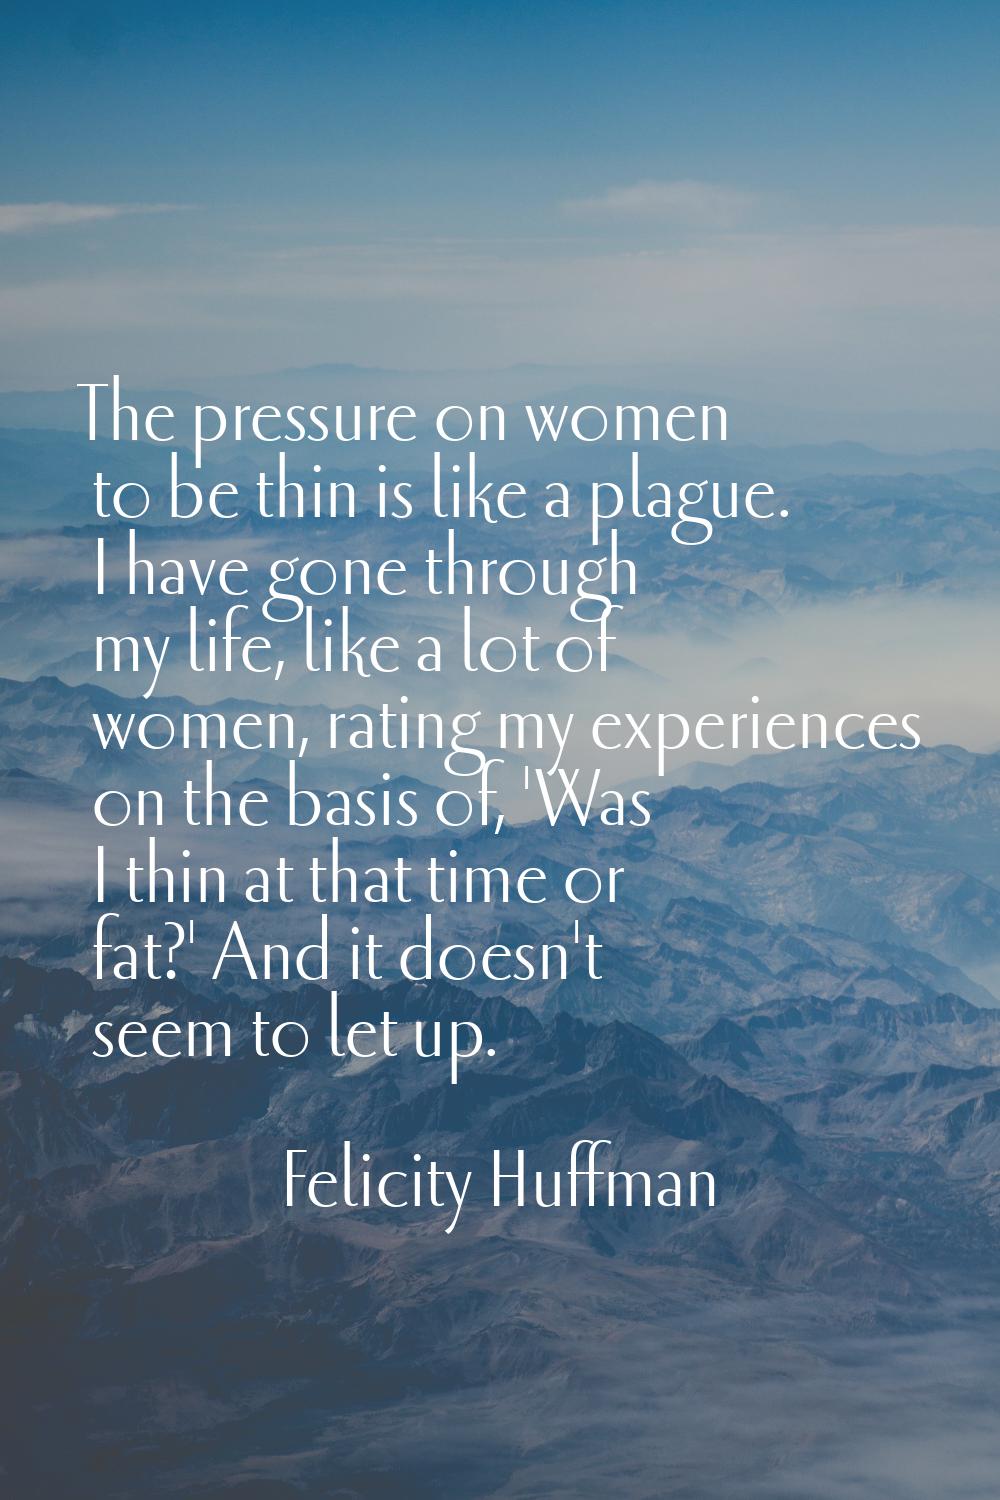 The pressure on women to be thin is like a plague. I have gone through my life, like a lot of women